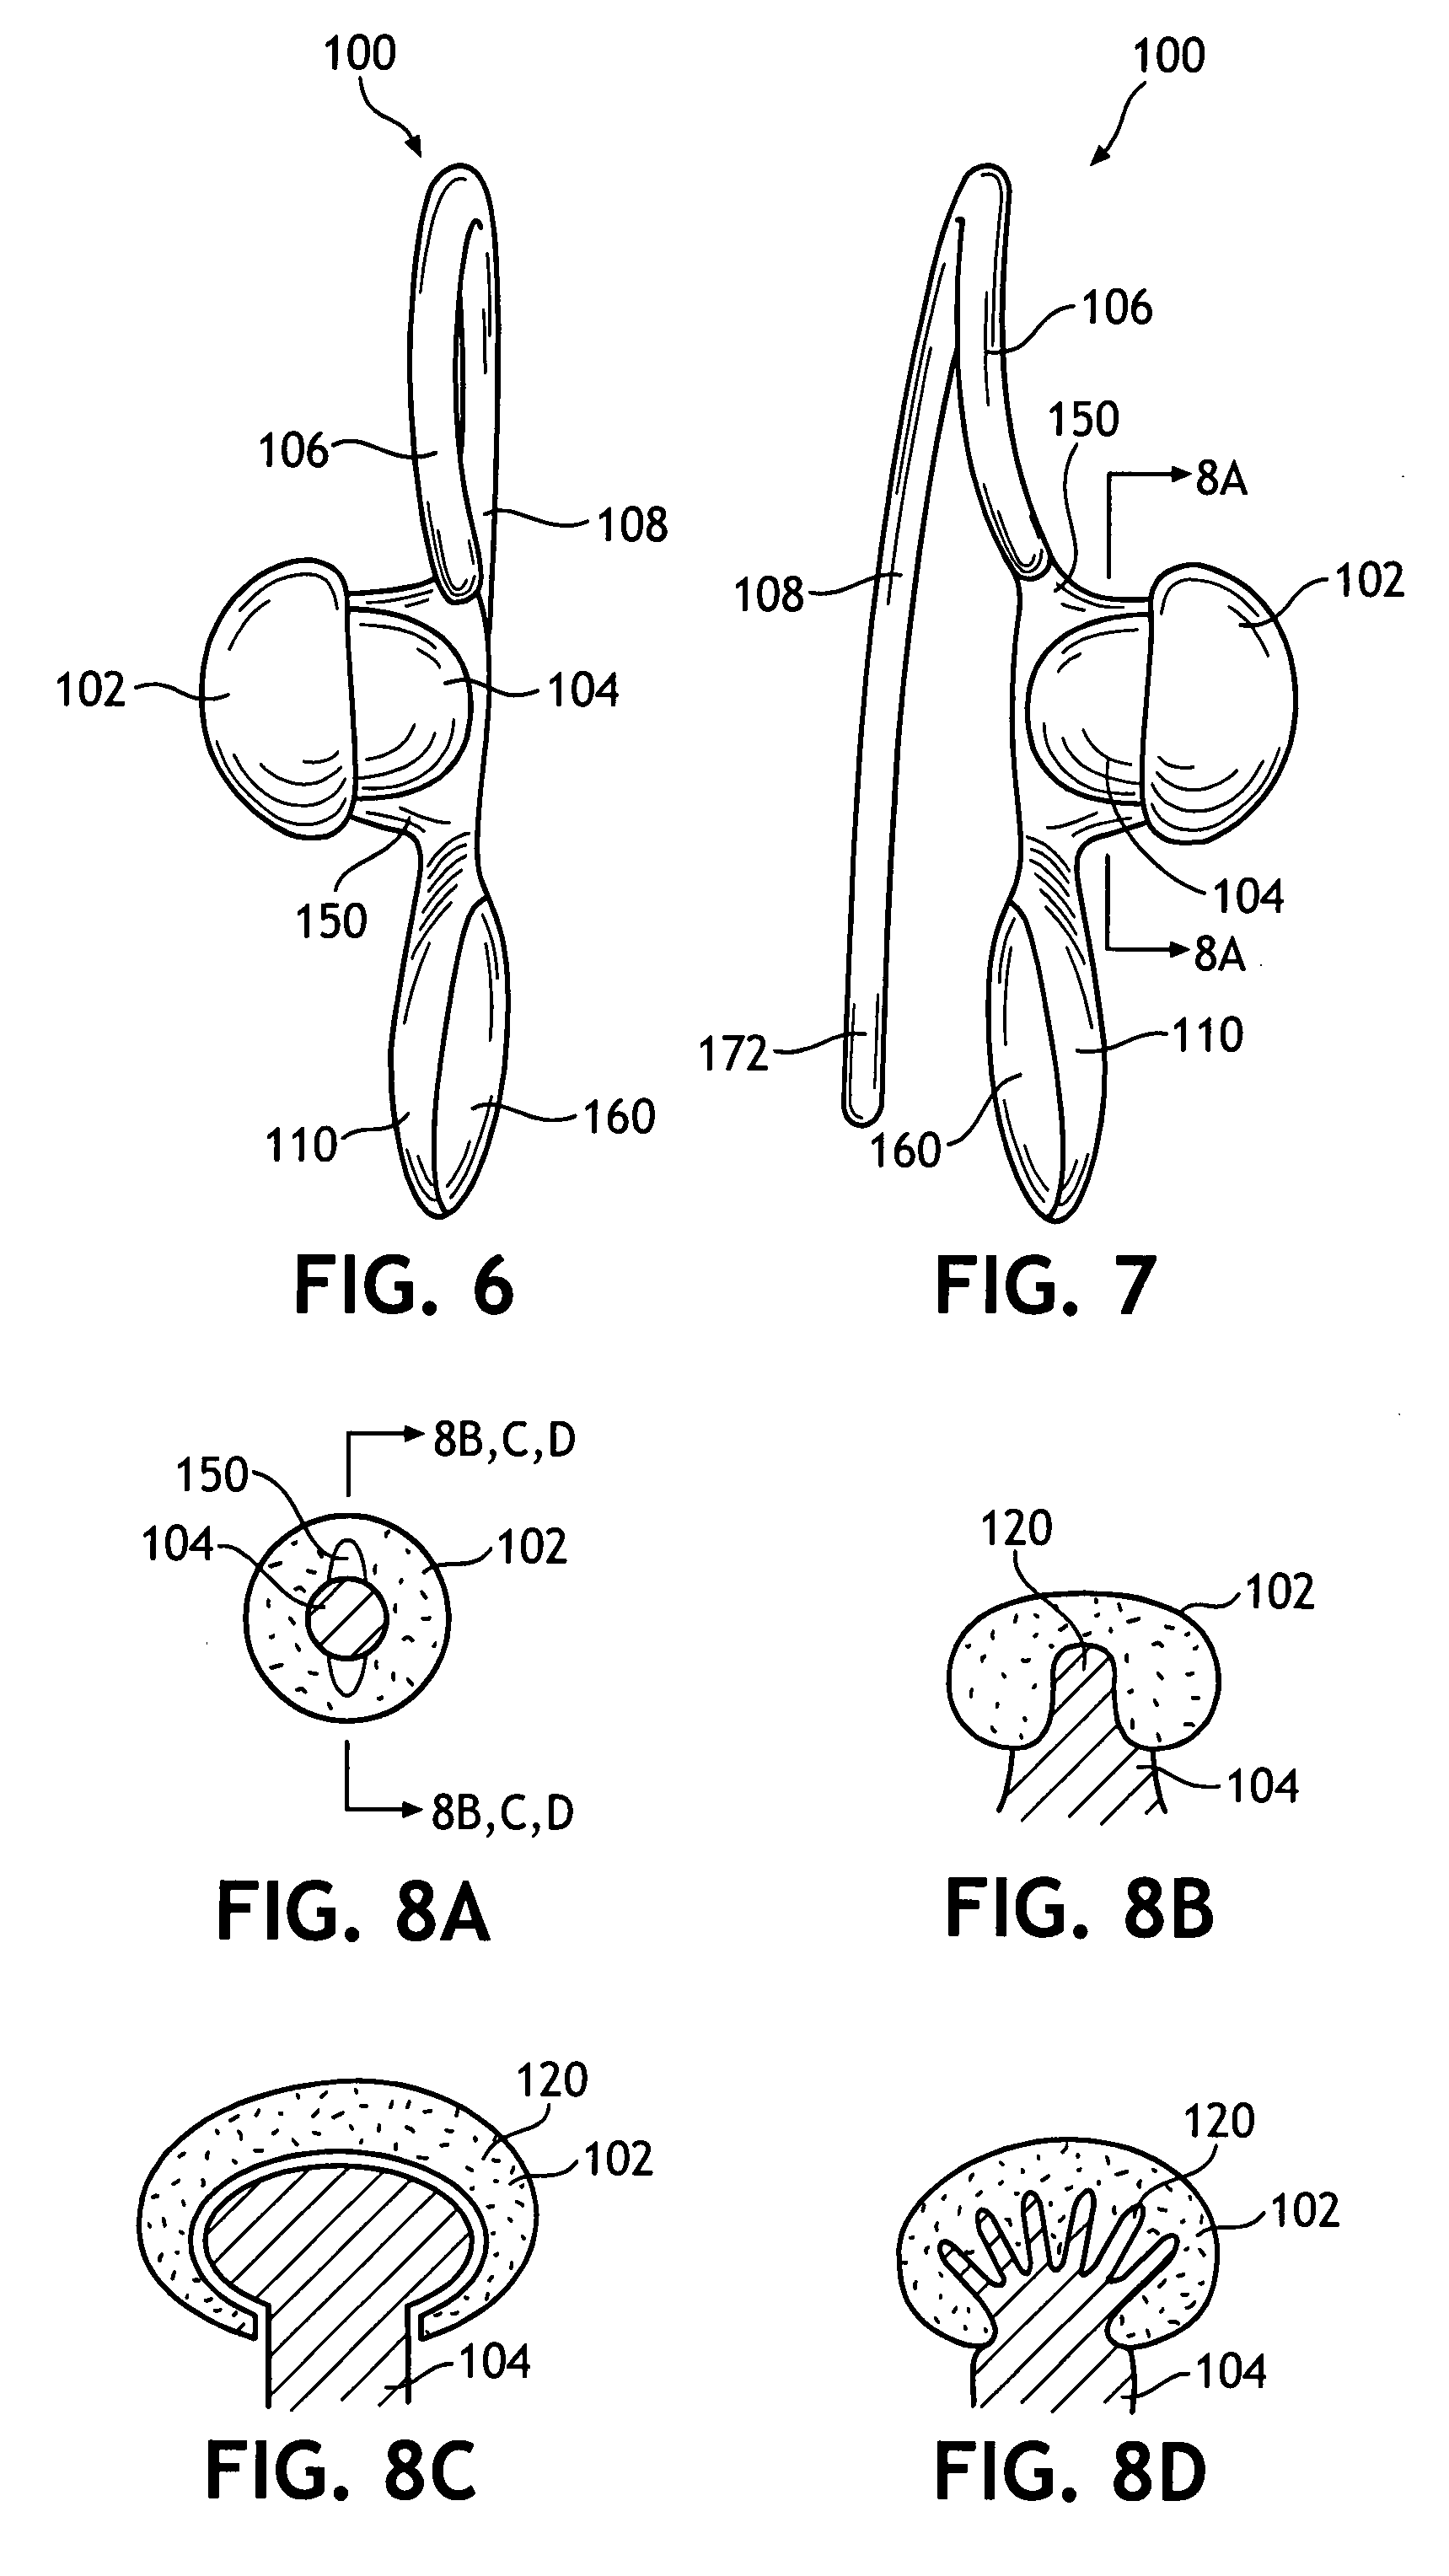 Clip-style hearing protector